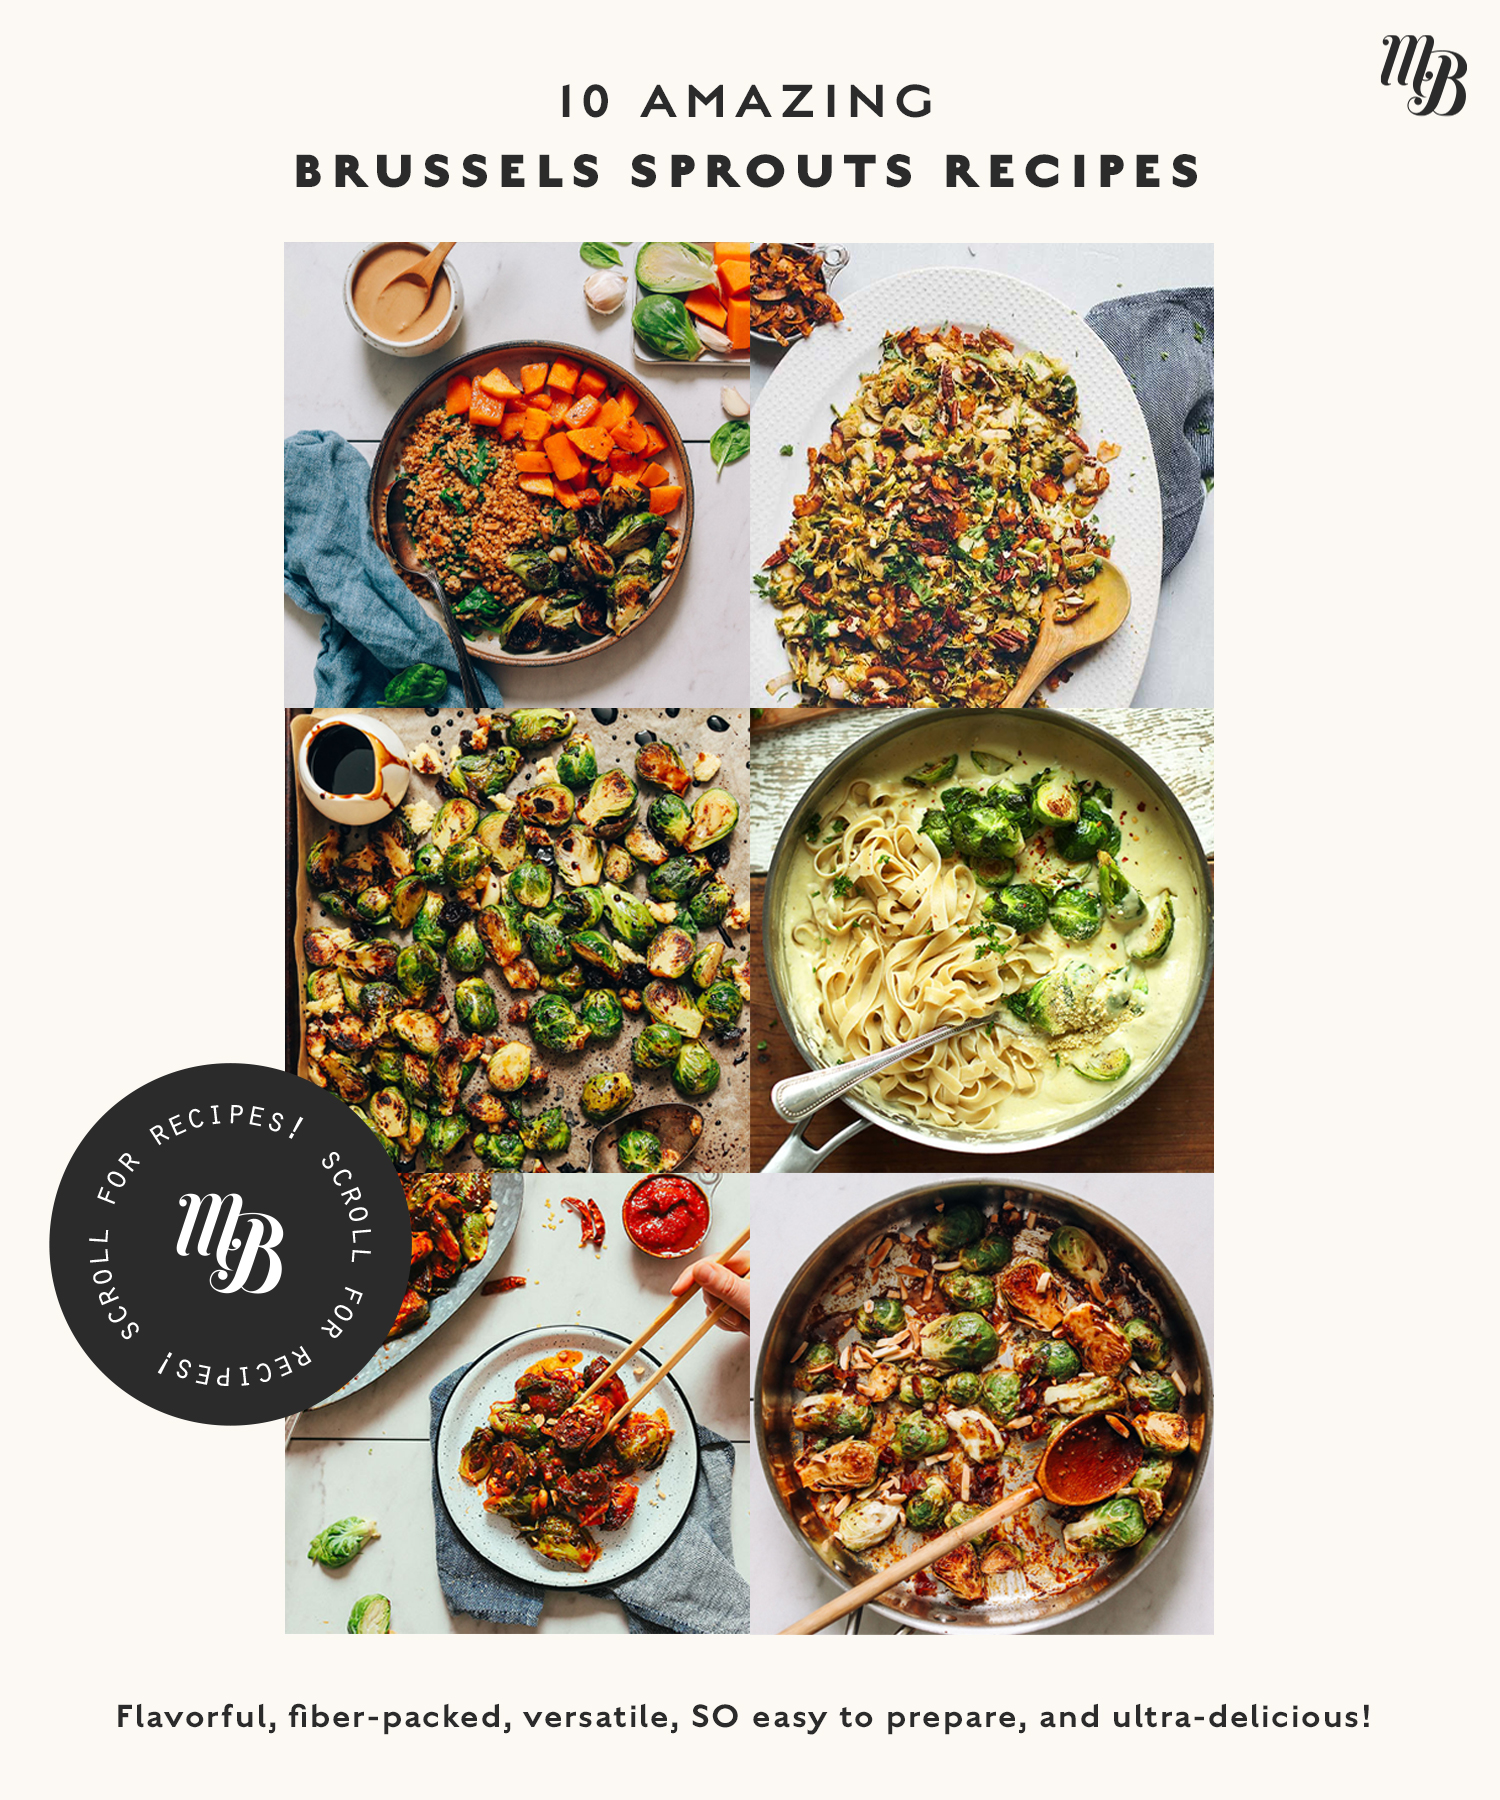 Assortment of Brussels sprout recipes